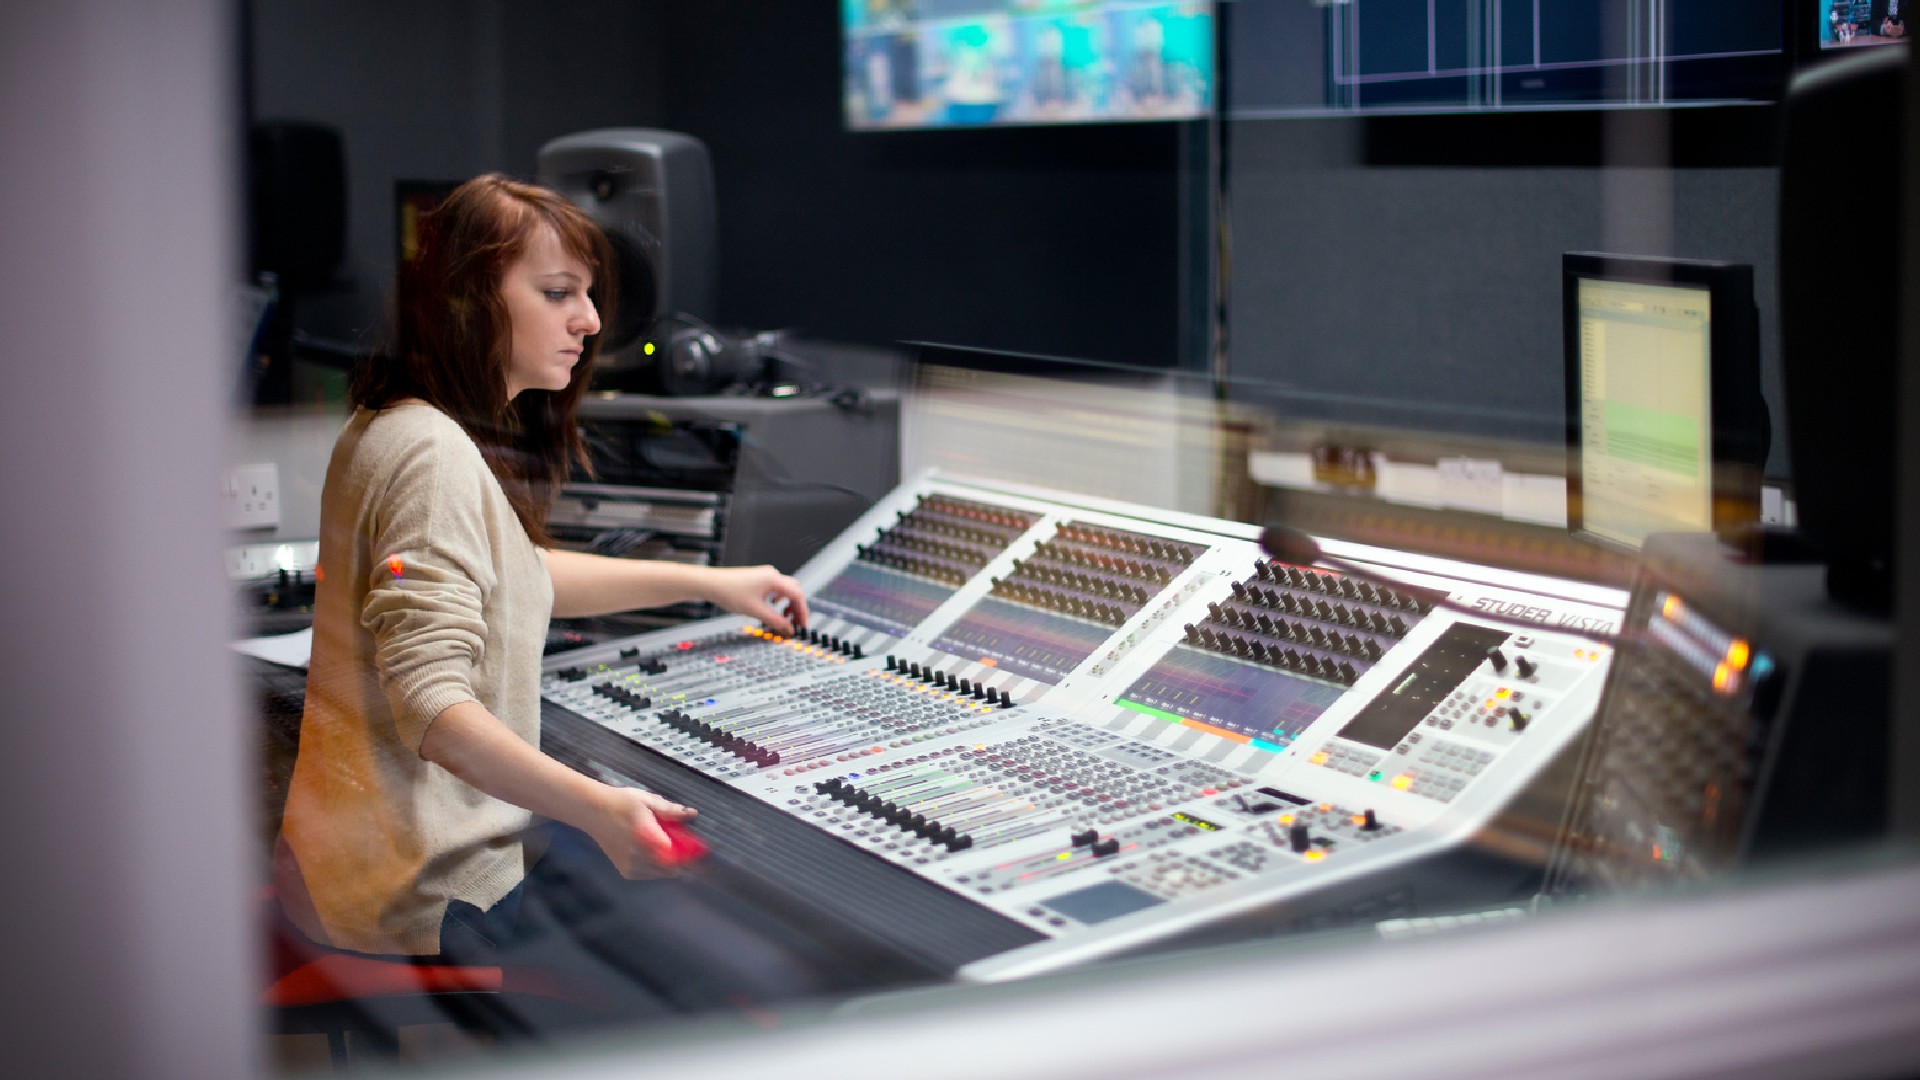 Student using media production equipment including a large mixing desk